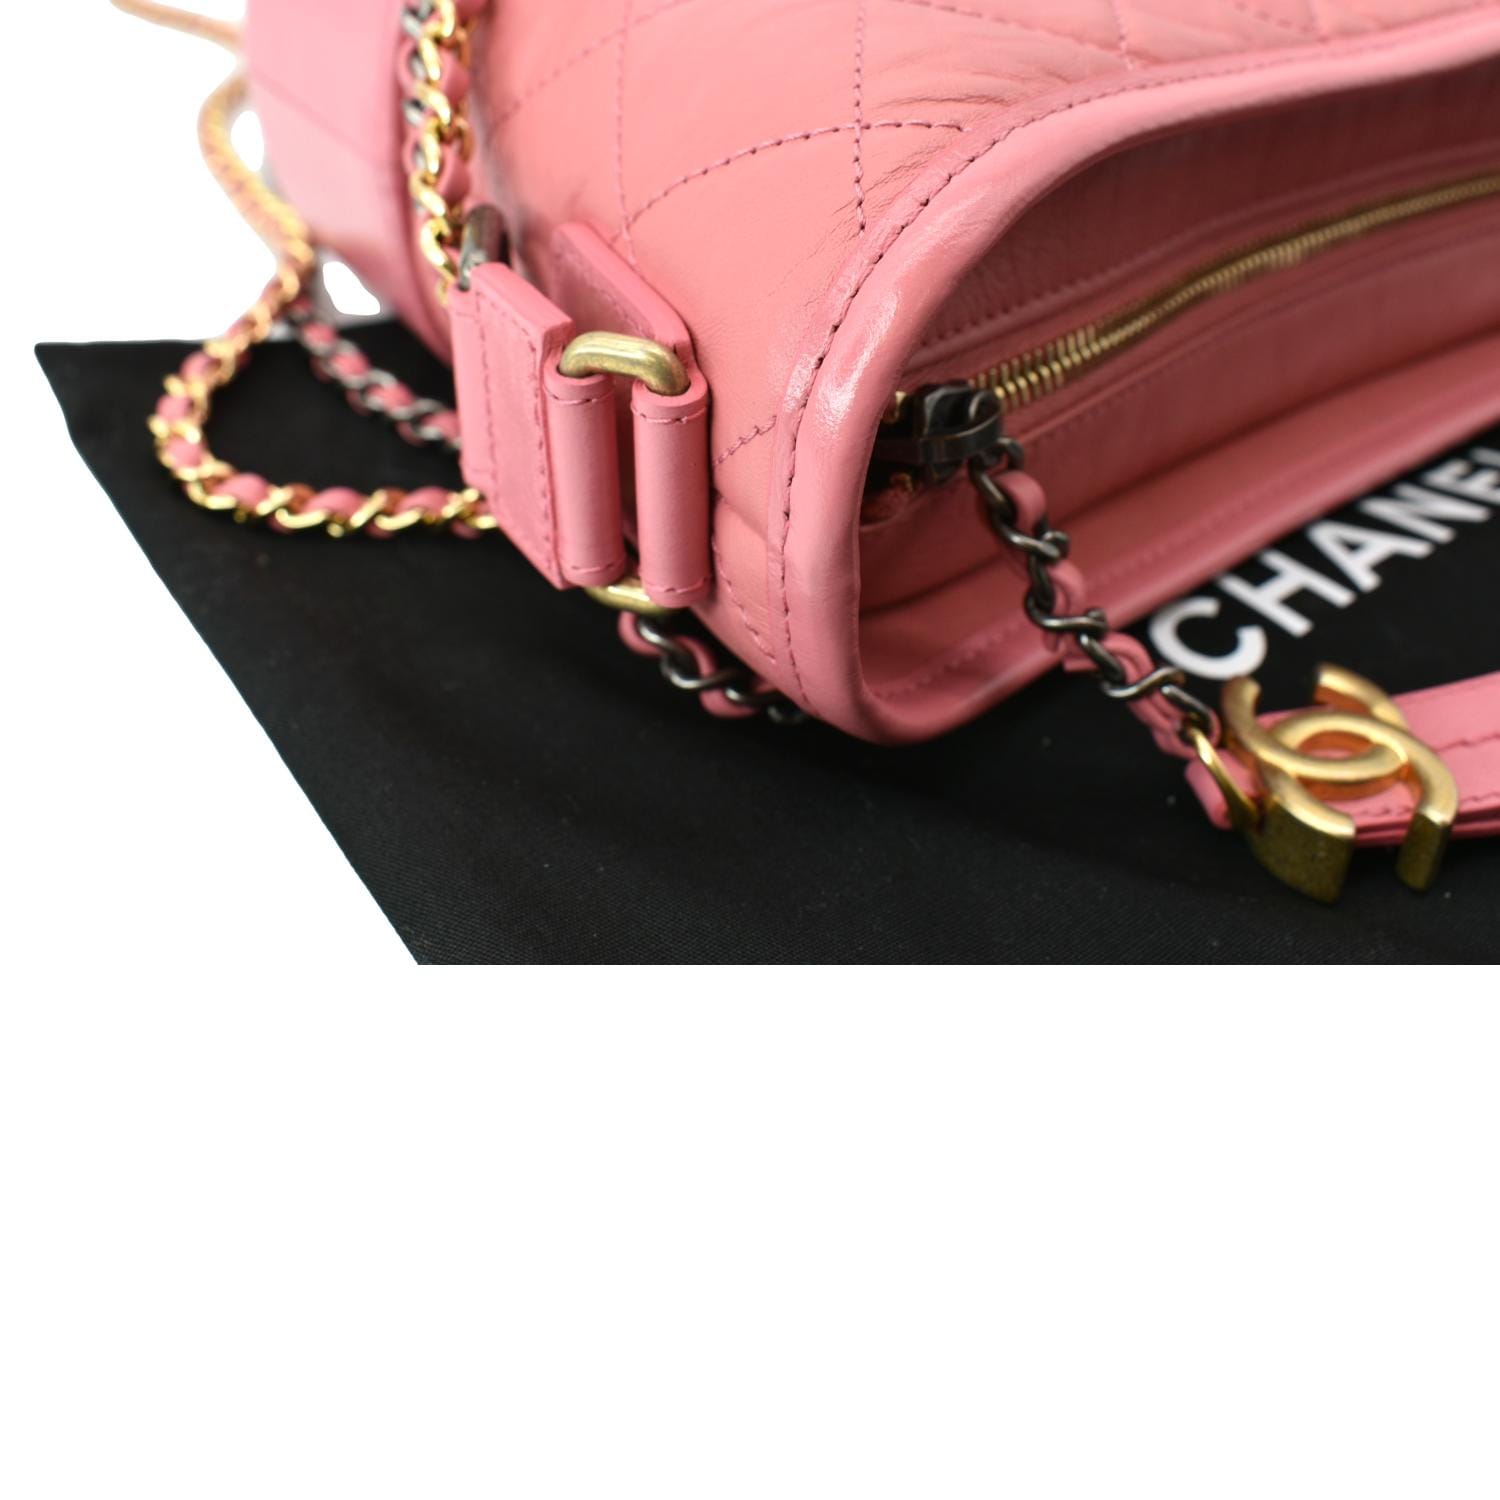 🔥RARE🔥 NEW! Chanel Gabrielle Python Small Nude Pink Hobo Shoulder Bag!